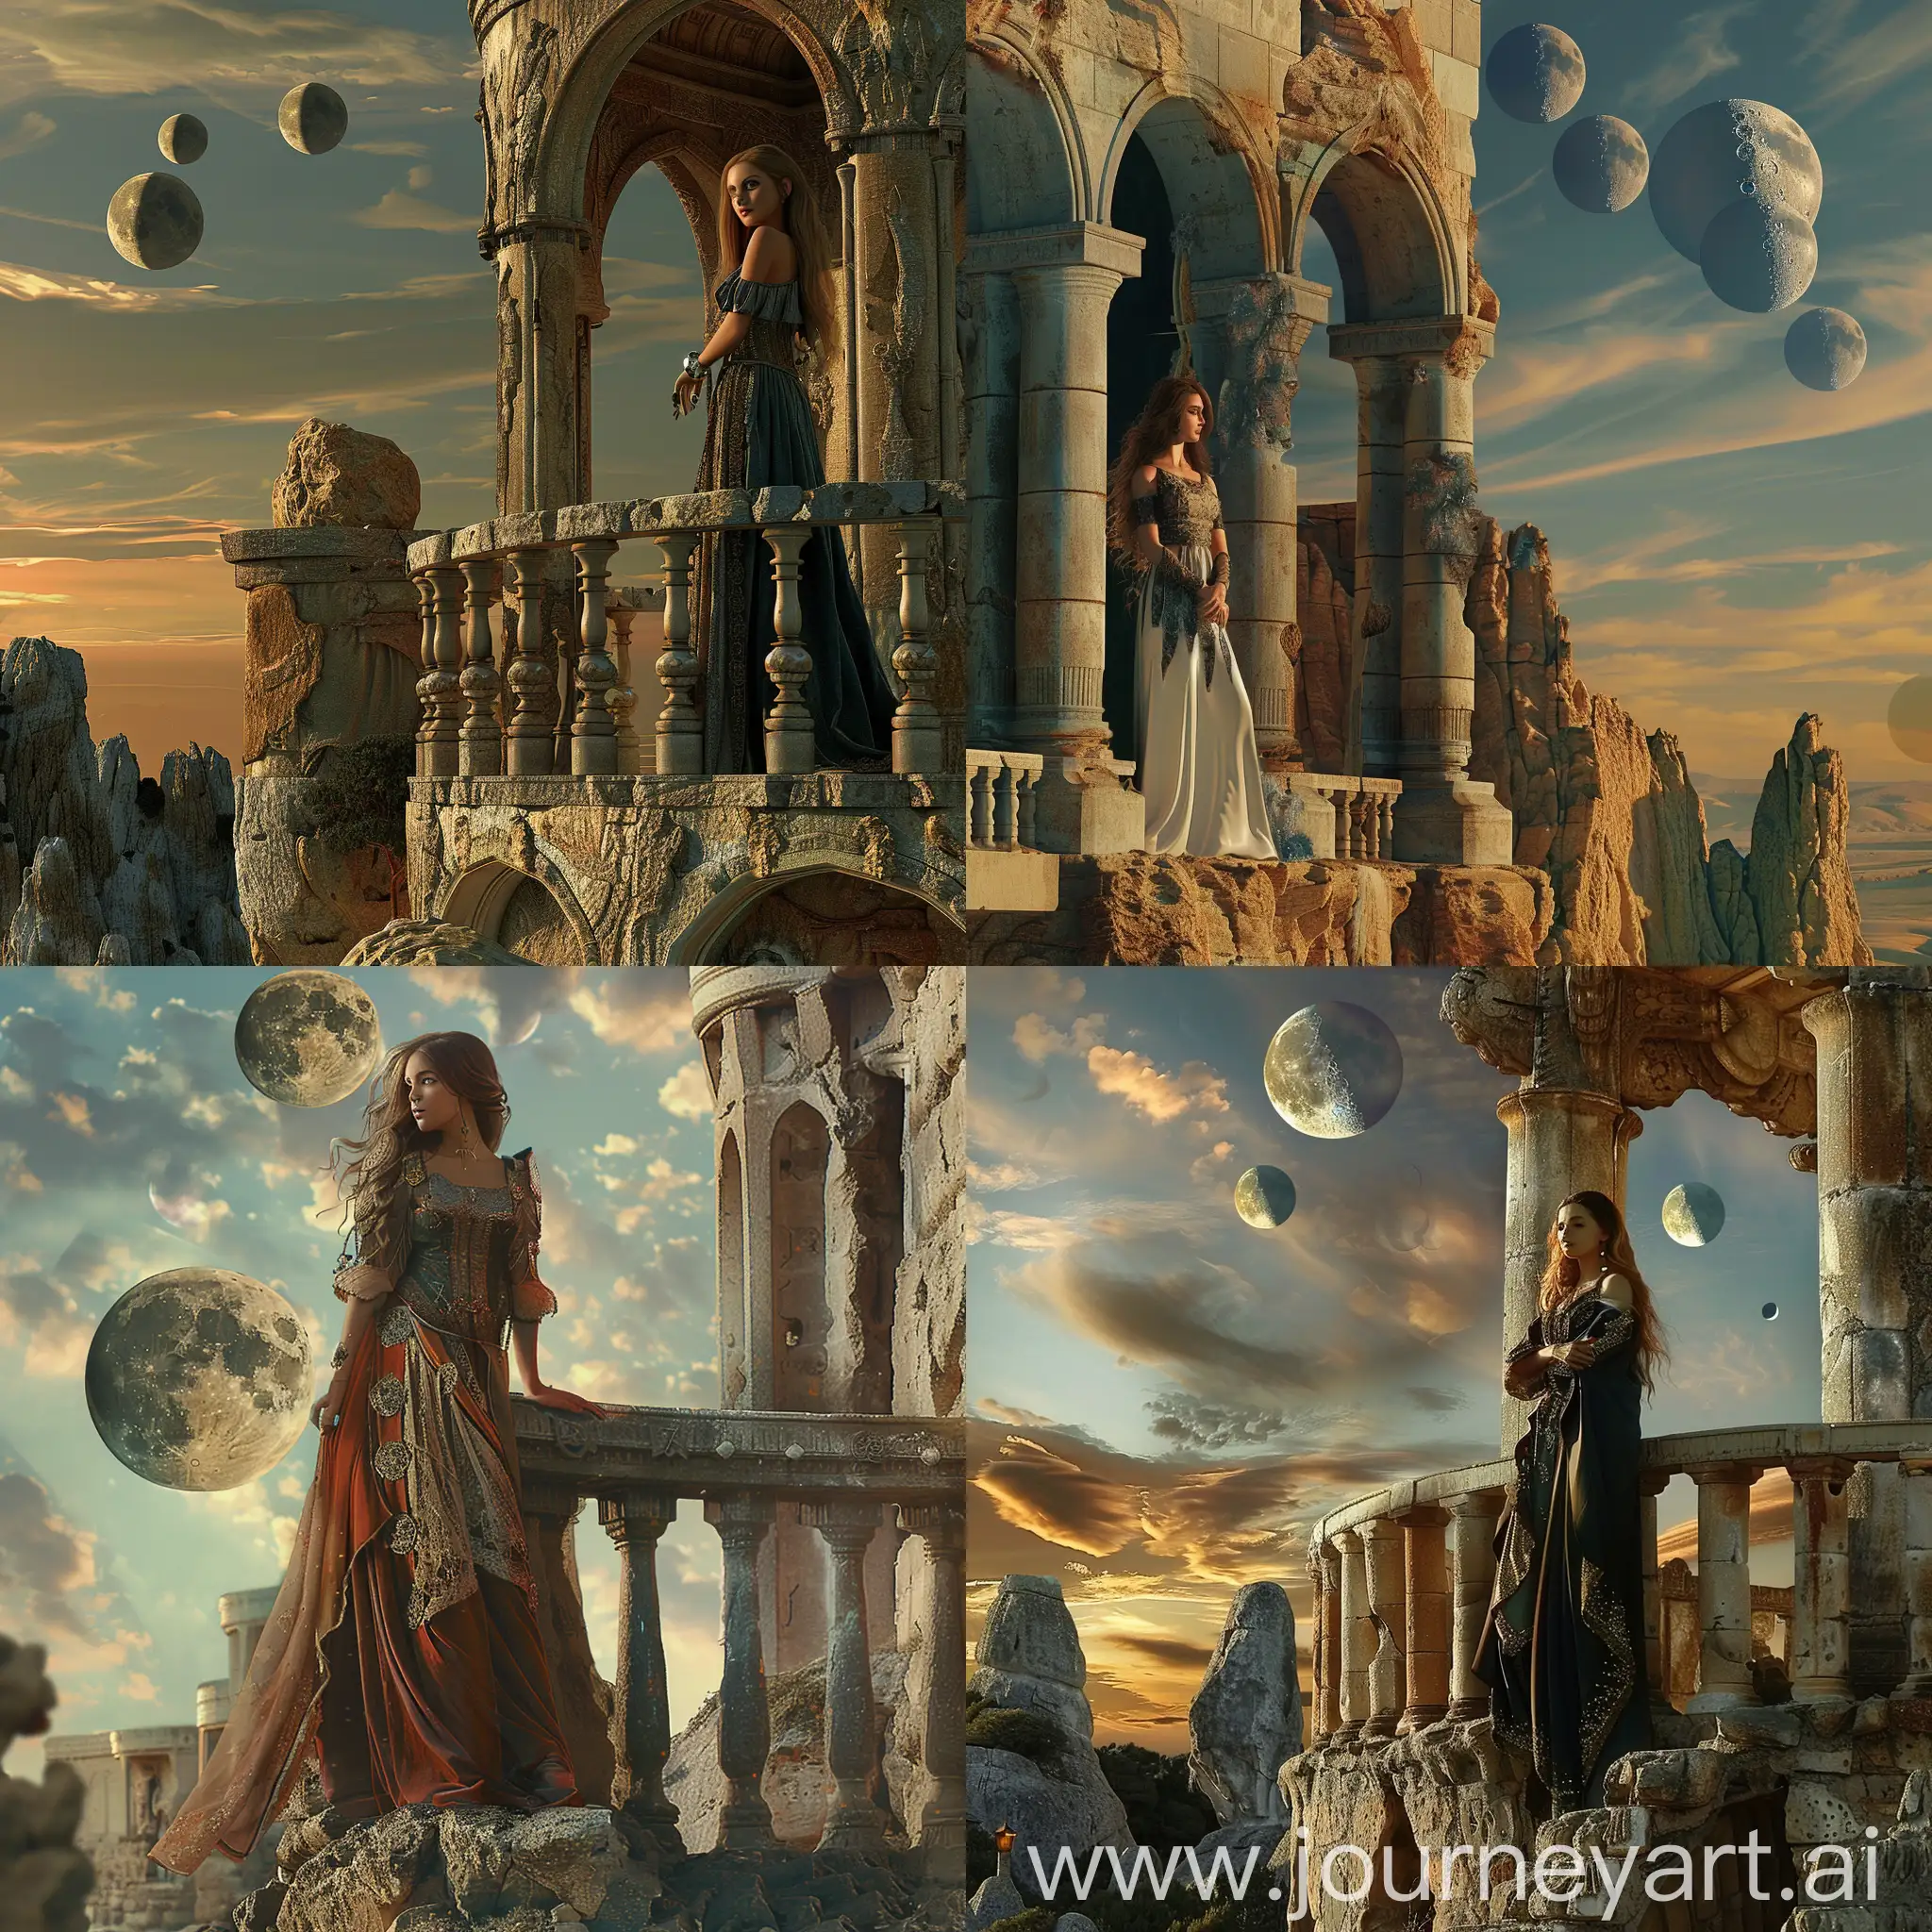 A beautiful medieval sci fi woman standing on a balcony of a ancient stone castle . In the background are three moons in the sky.